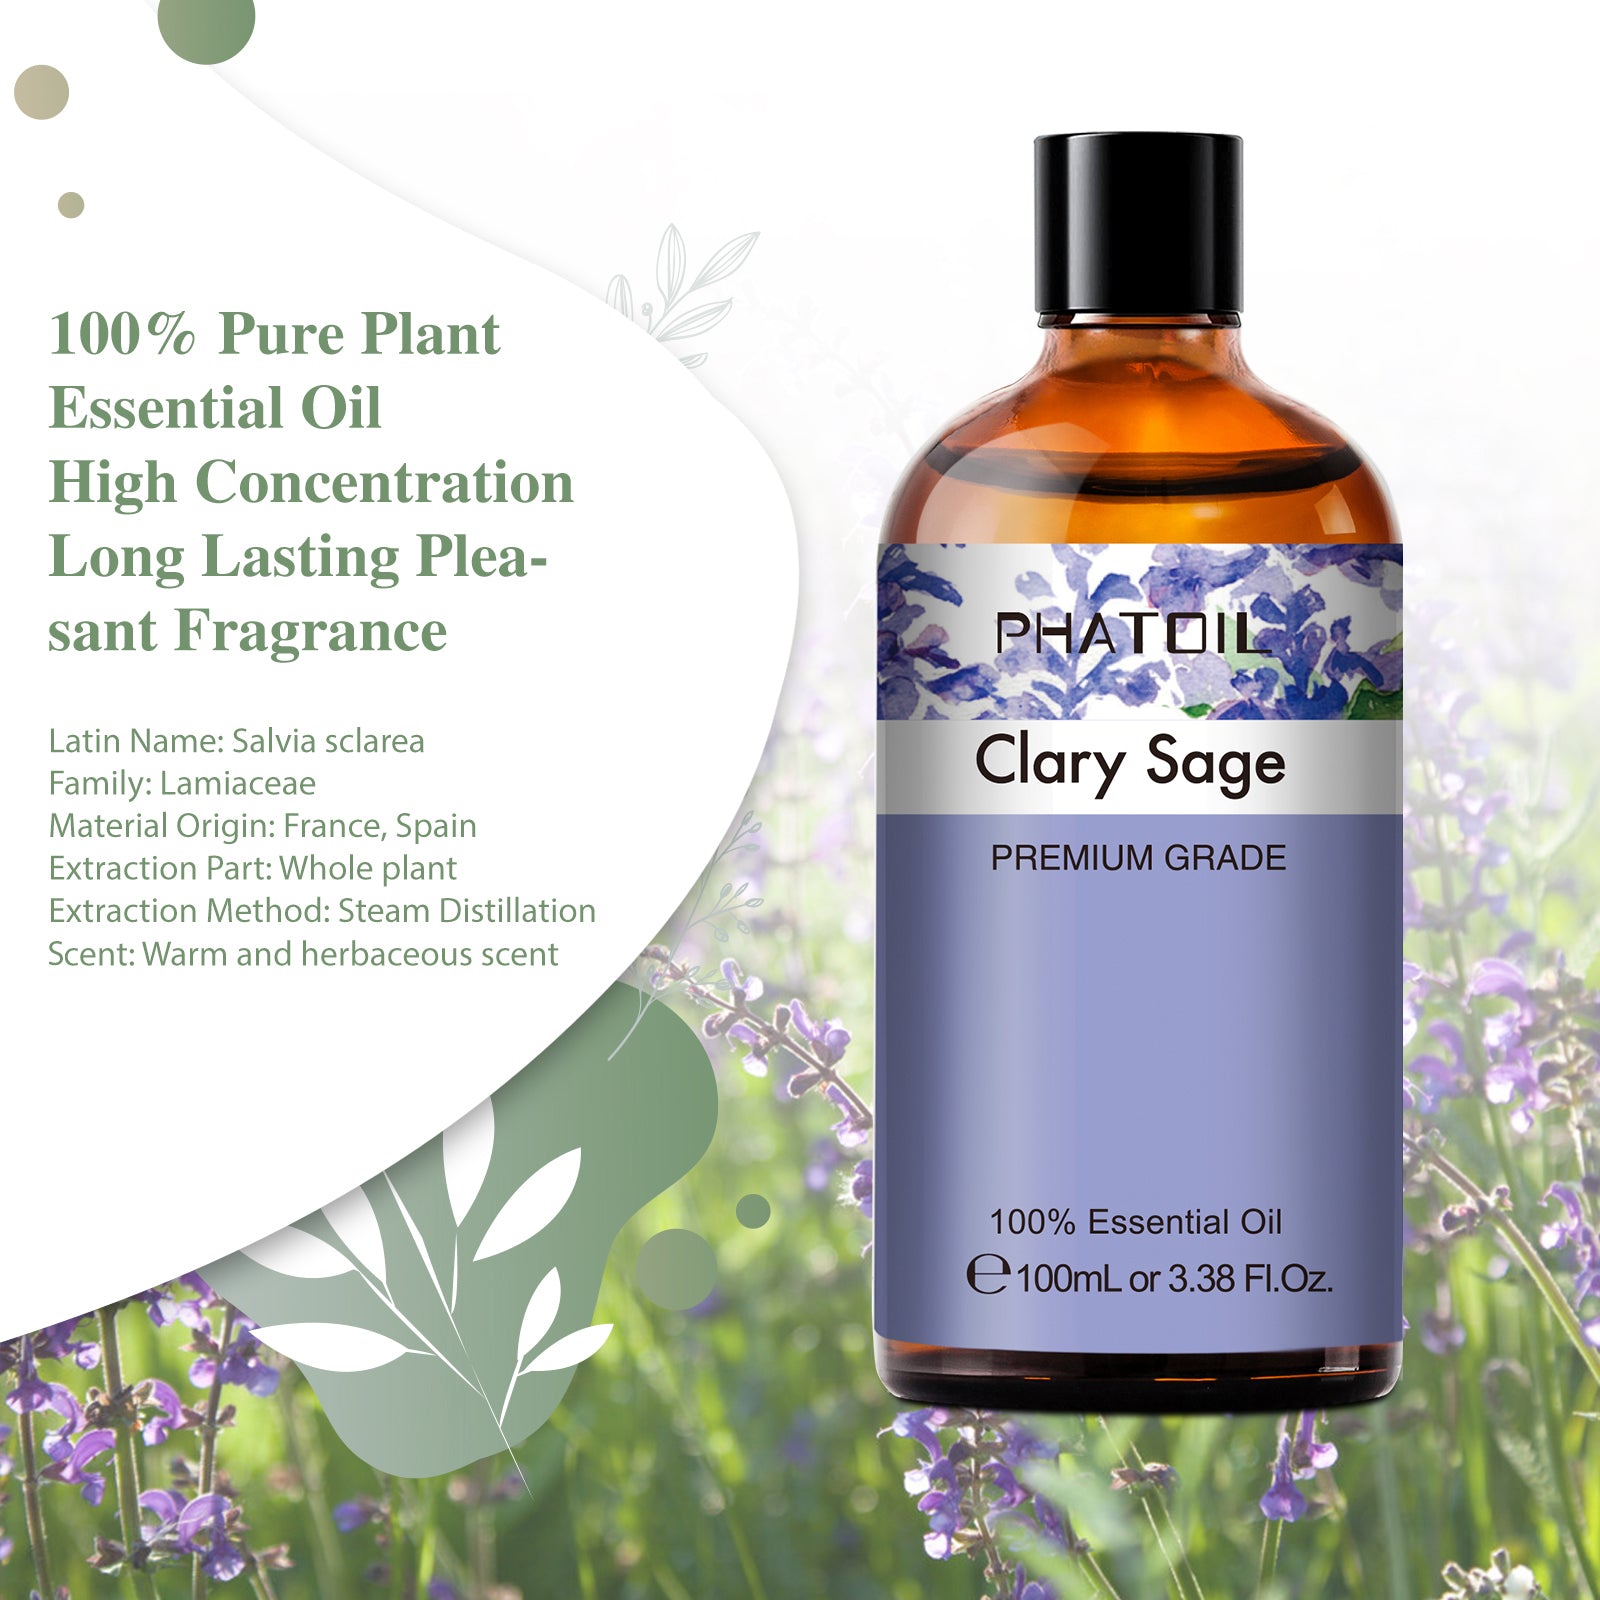 clary sage essential oil diffuser